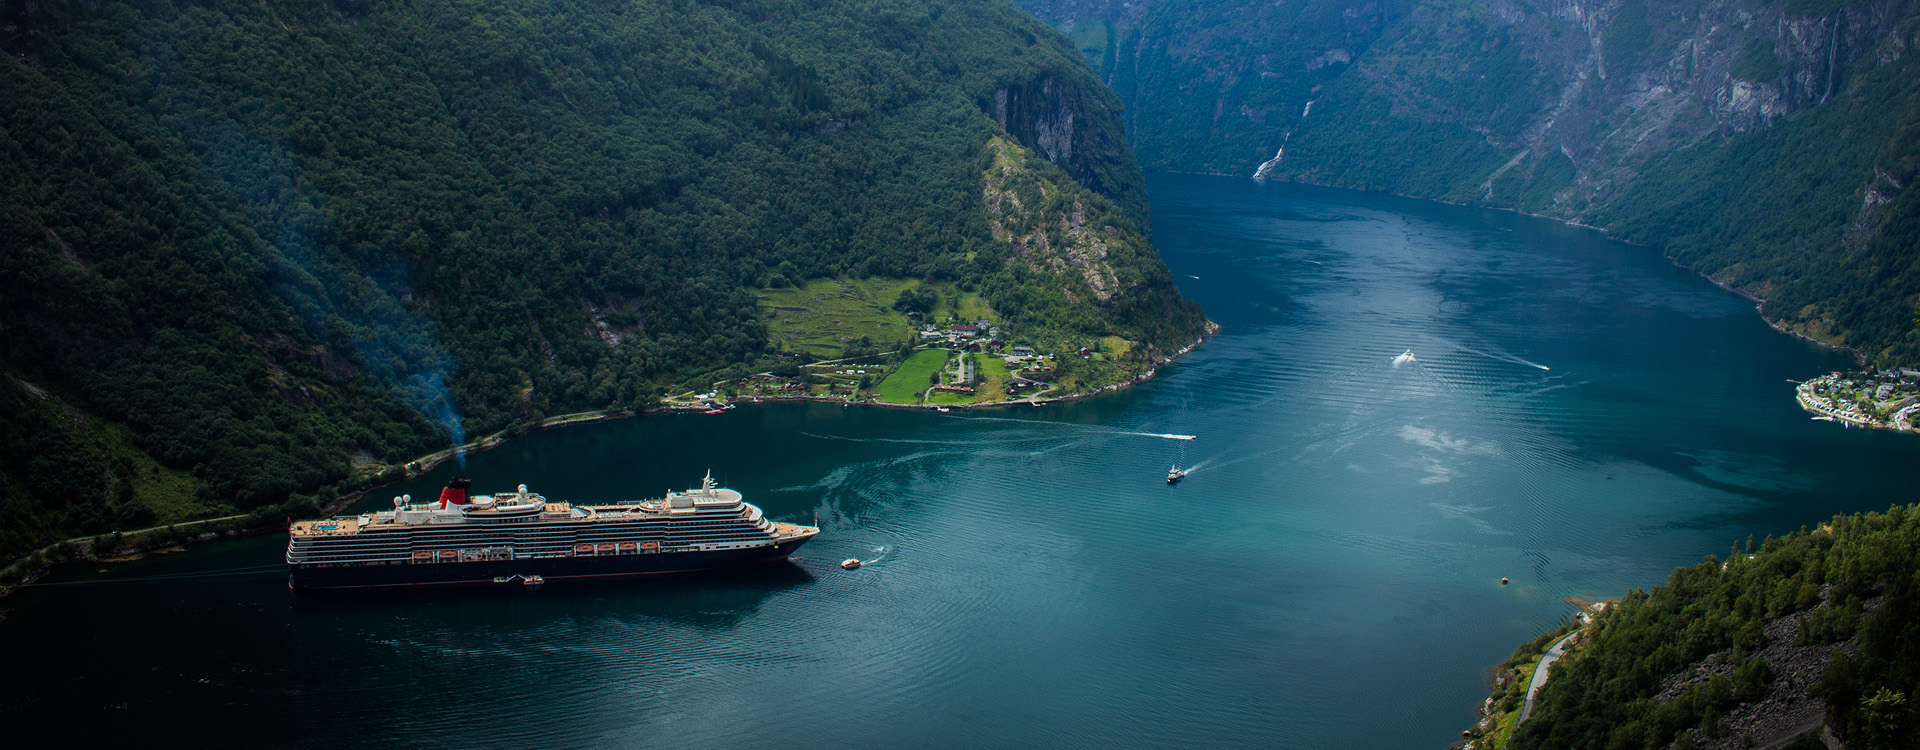 The Road to Geiranger, Norway's Most Famous Fjord